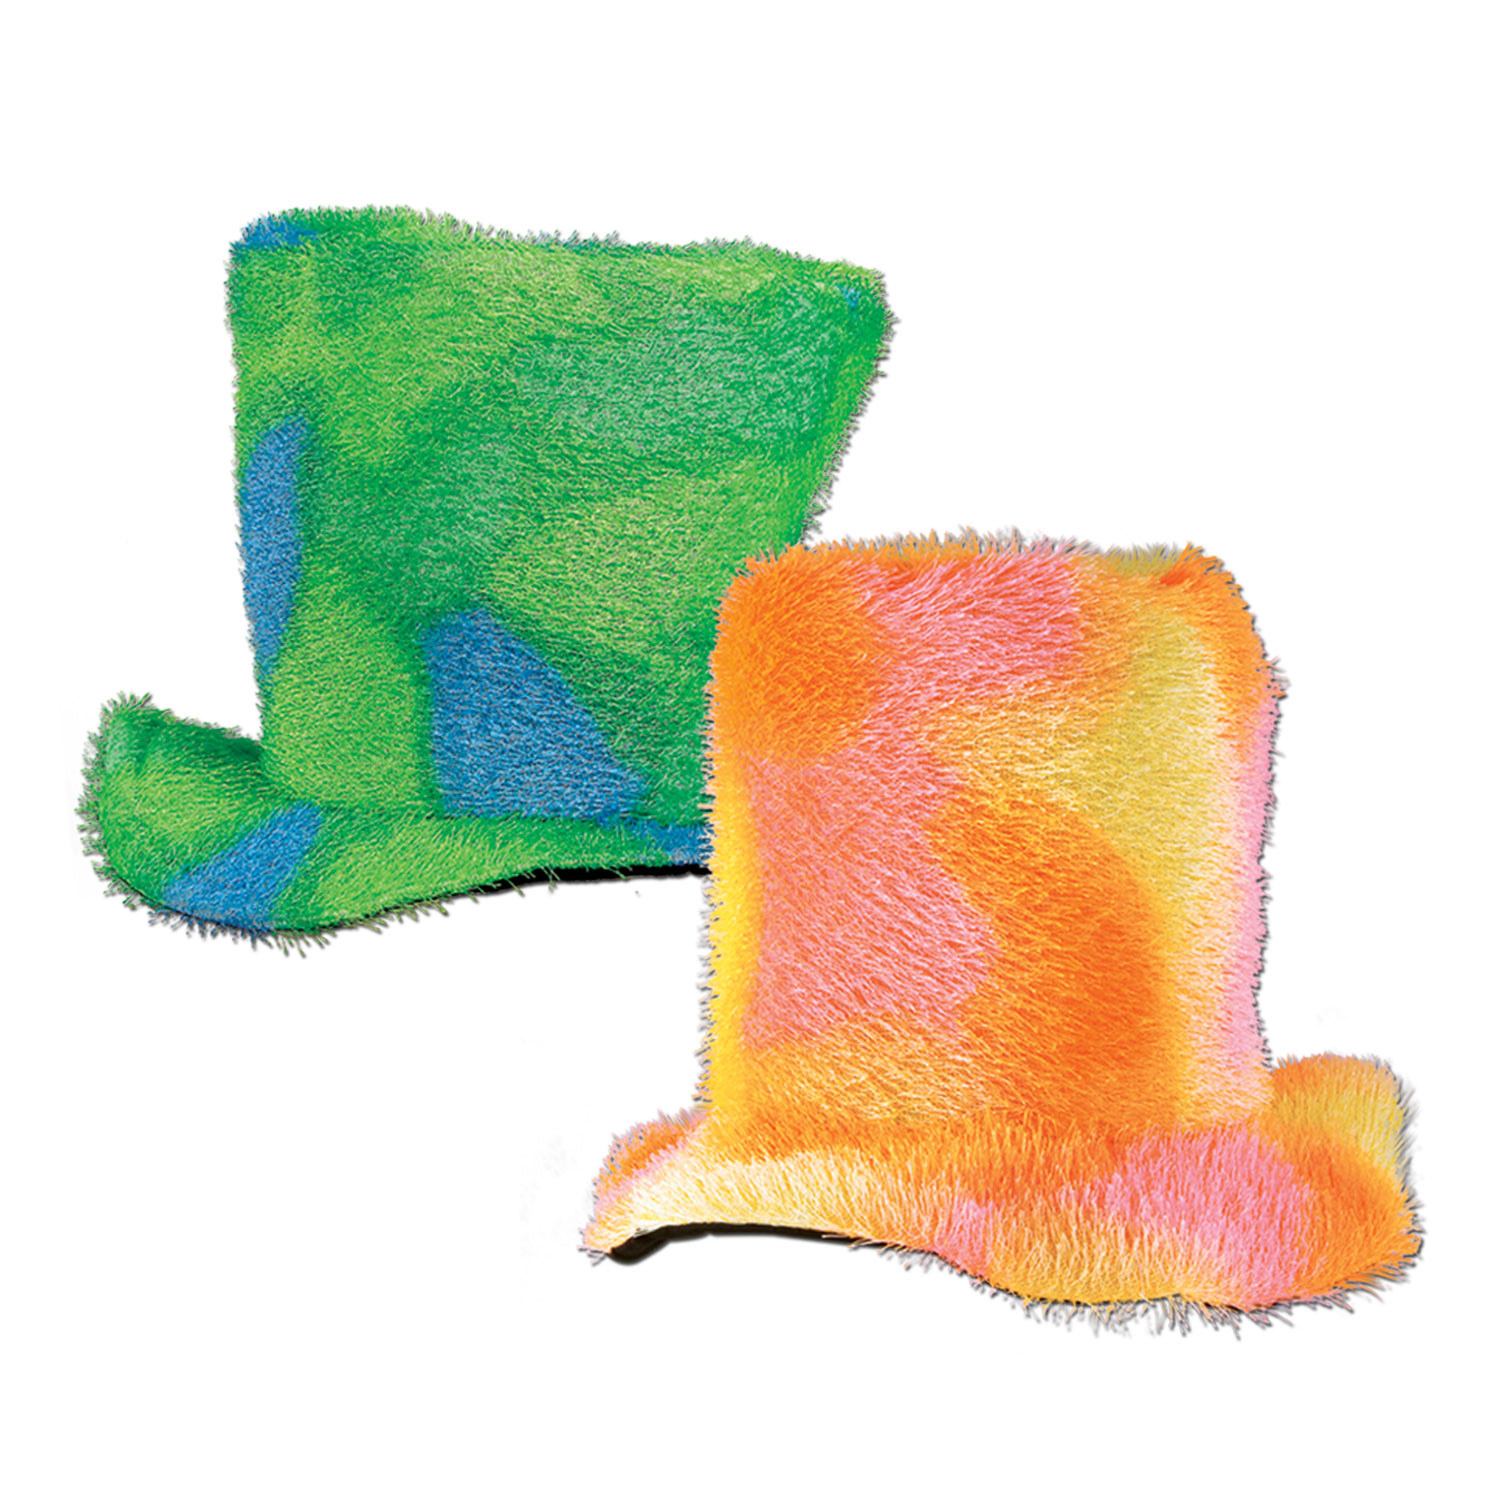 1970s style fuzzy hat in green and yellow